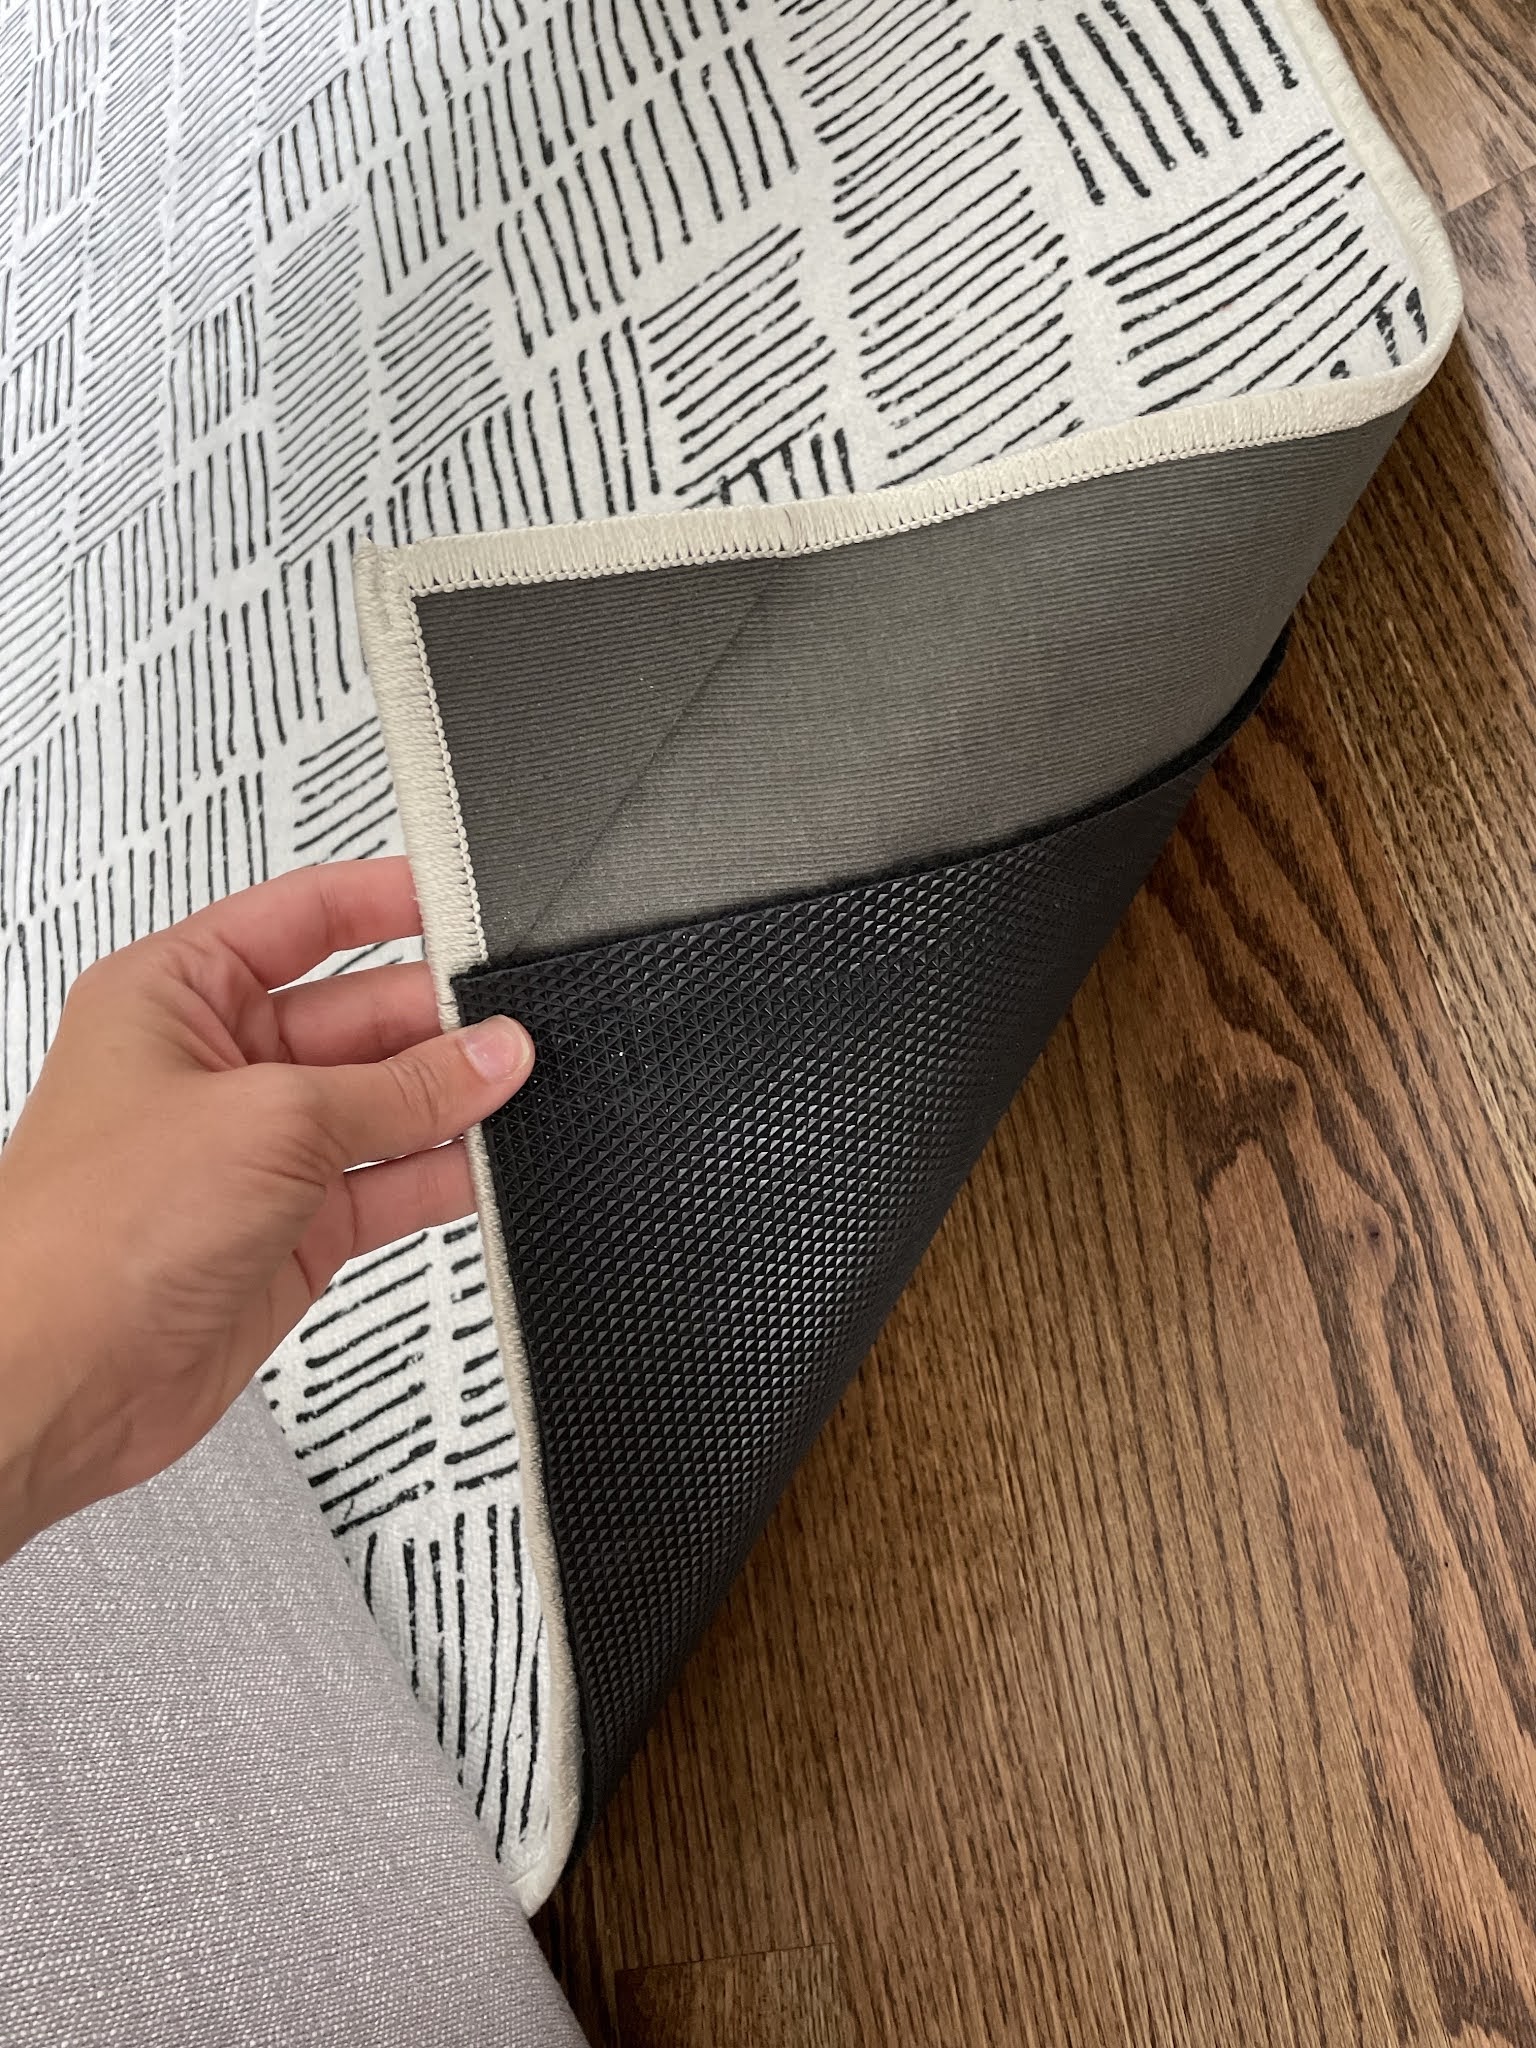 Tumble Rugs Review #2 - Washable Rug Review - Read Before Buying